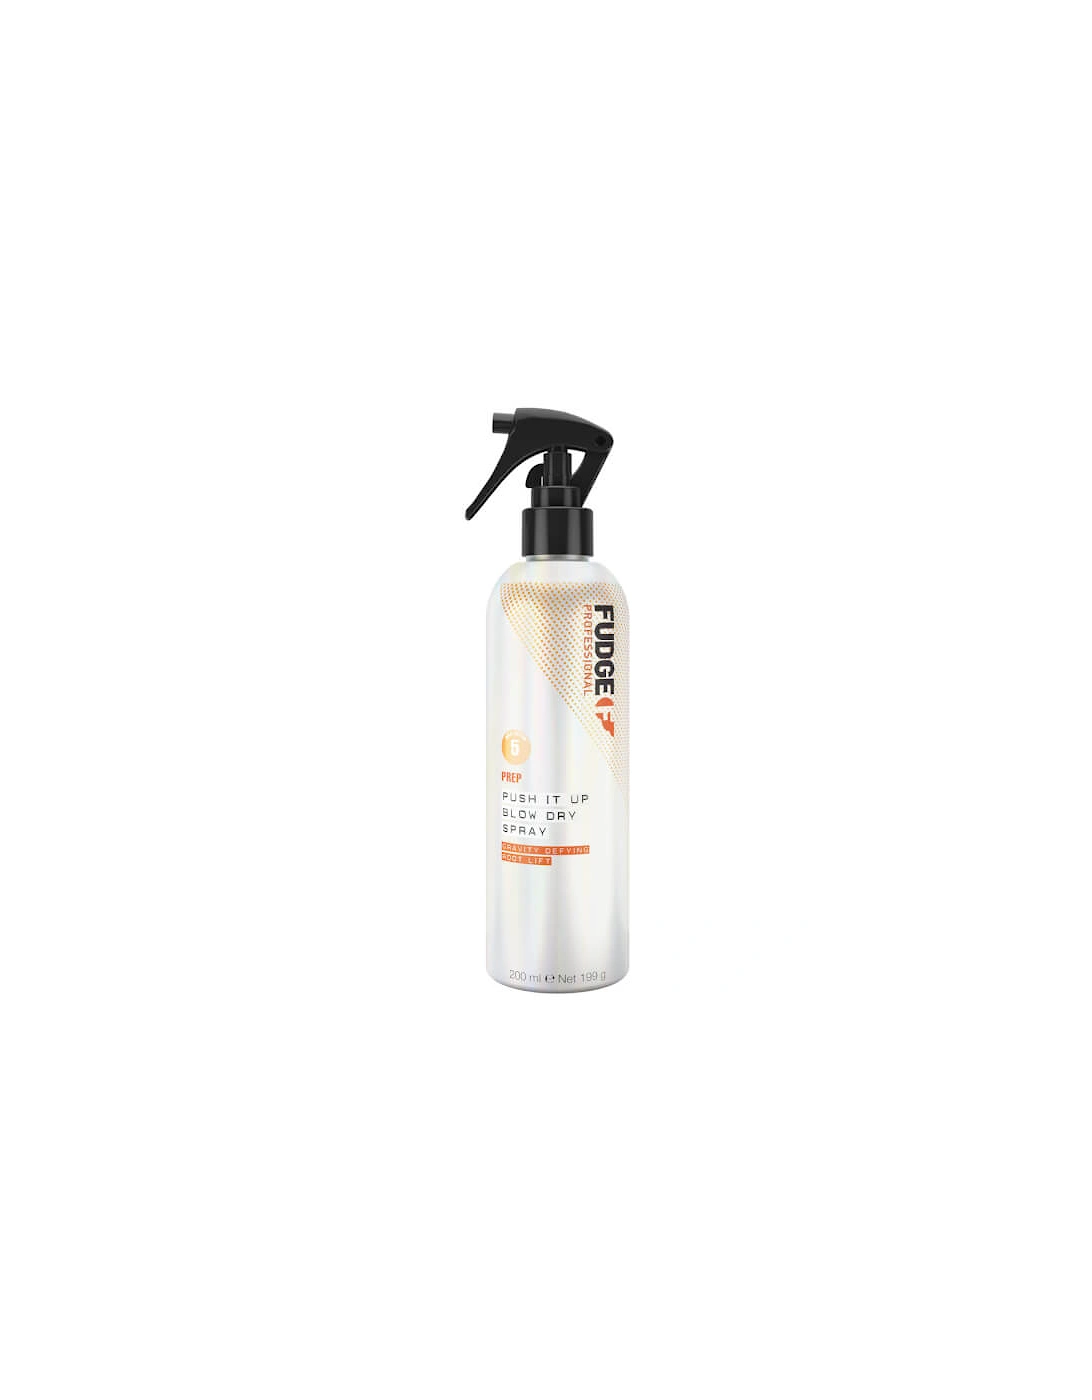 Professional Styling Push-it-up Blow Dry Spray 200ml, 2 of 1